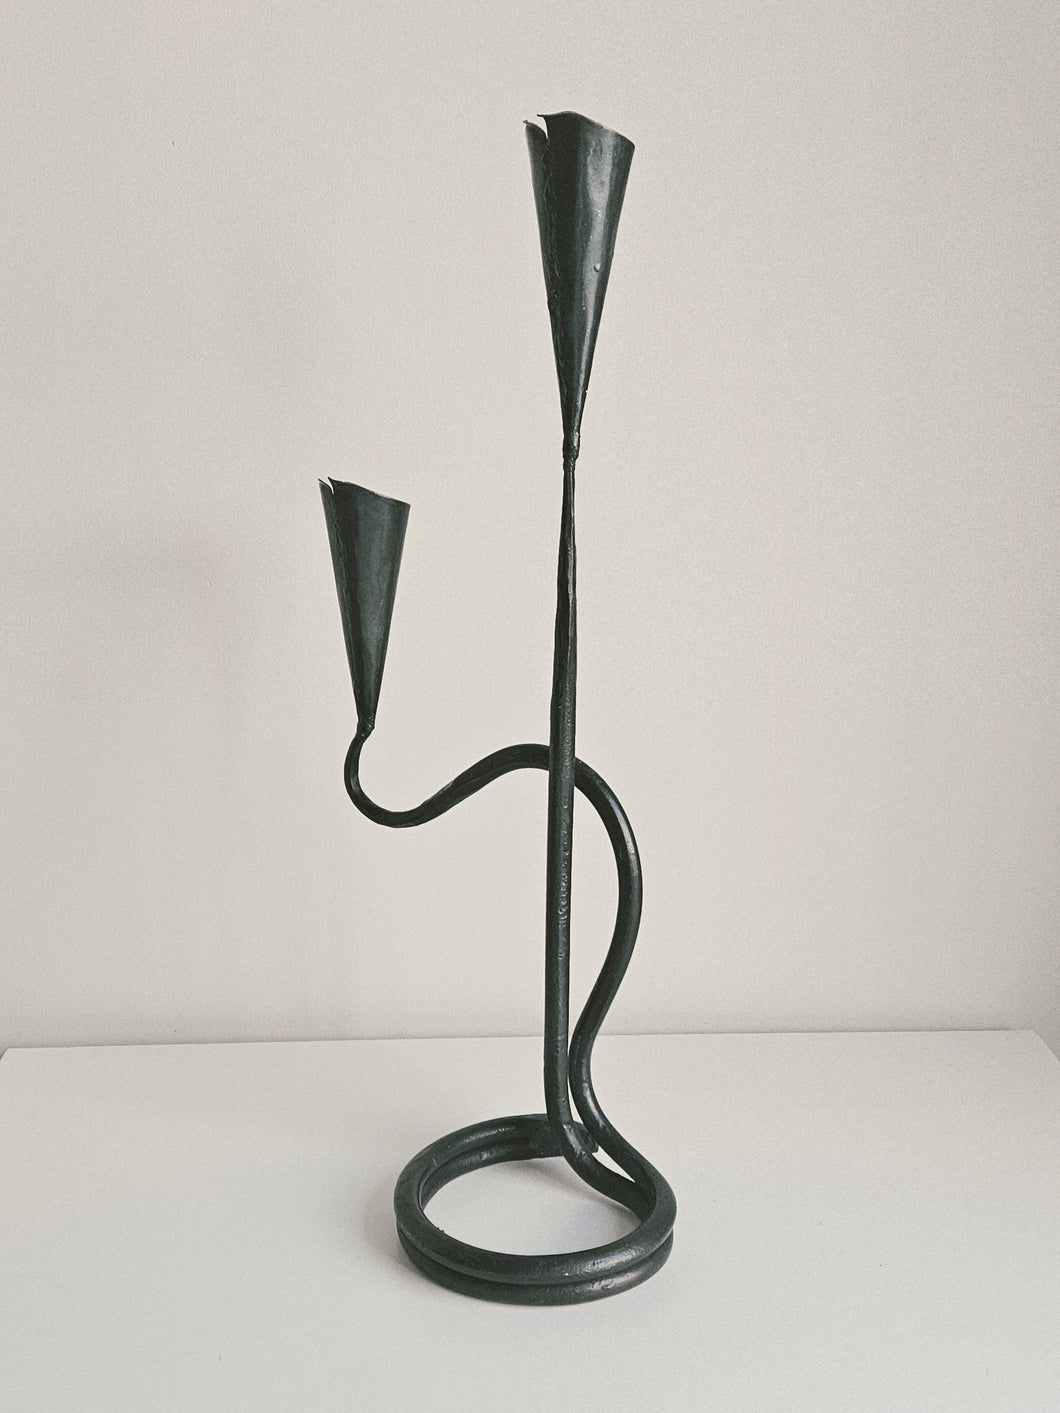 LILY CANDLESTICK